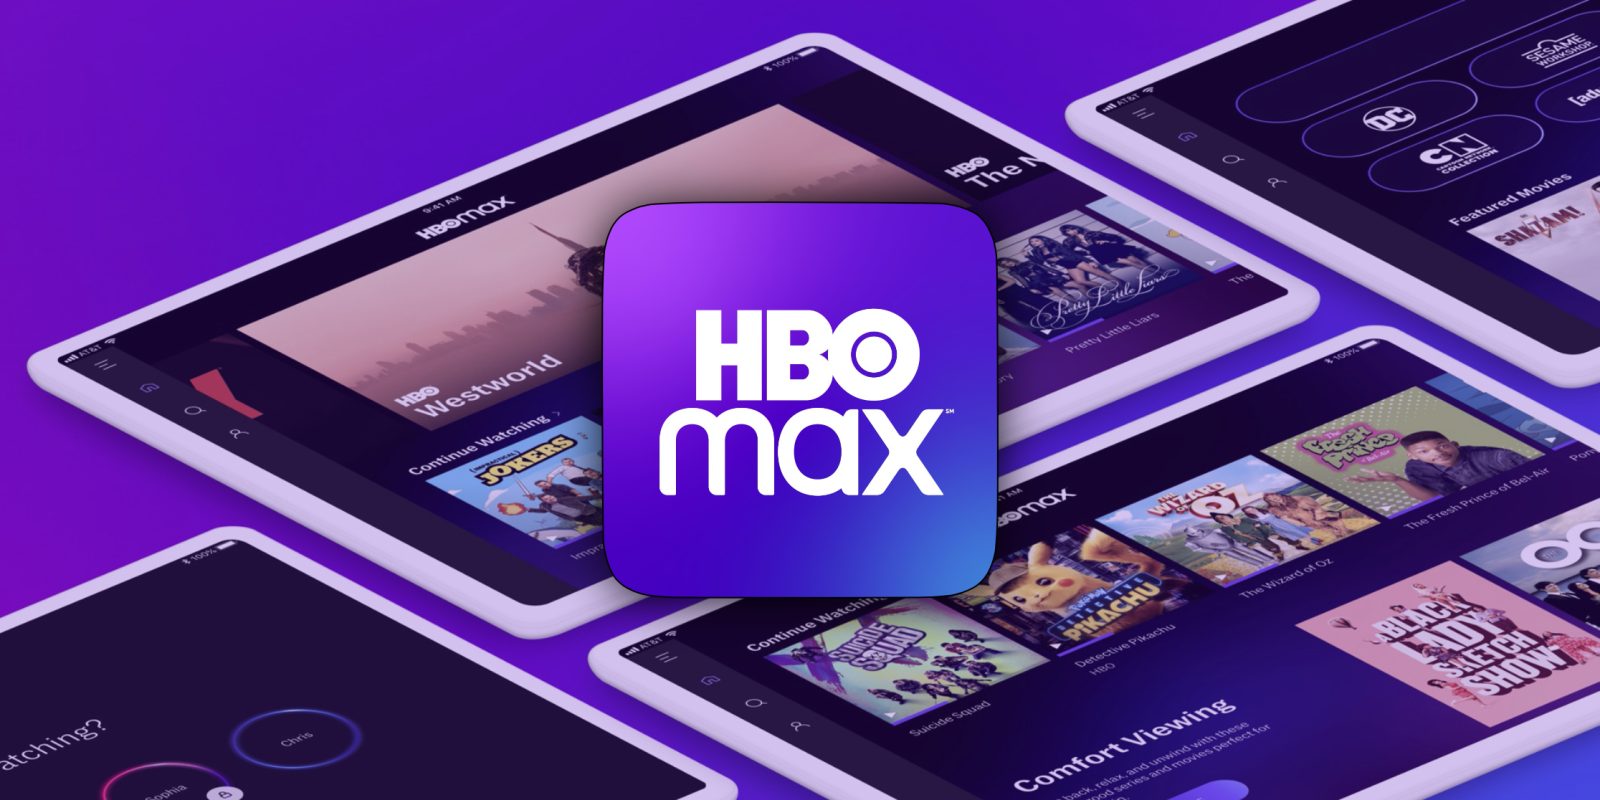 https://9to5mac.com/wp-content/uploads/sites/6/2020/05/hbox-max-app-store.jpg?quality=82&strip=all&w=1600